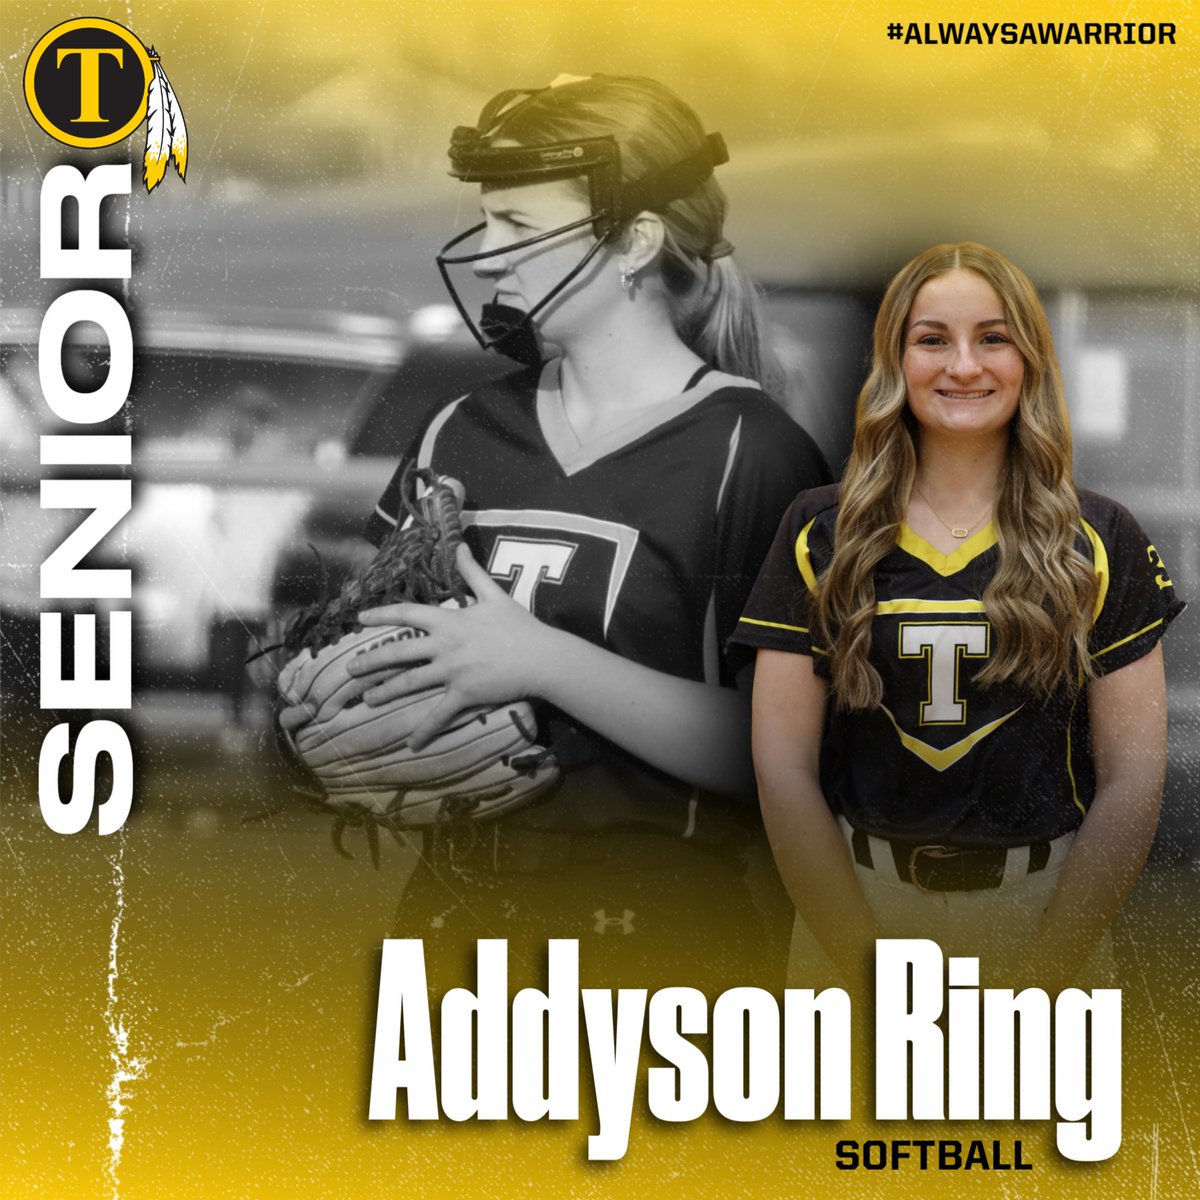 We would like to congratulate Addyson Ring, Senior Softball player, on an outstanding career at TCHS and wish her the best of luck!  #SeniorSpotlight #alwaysawarrior